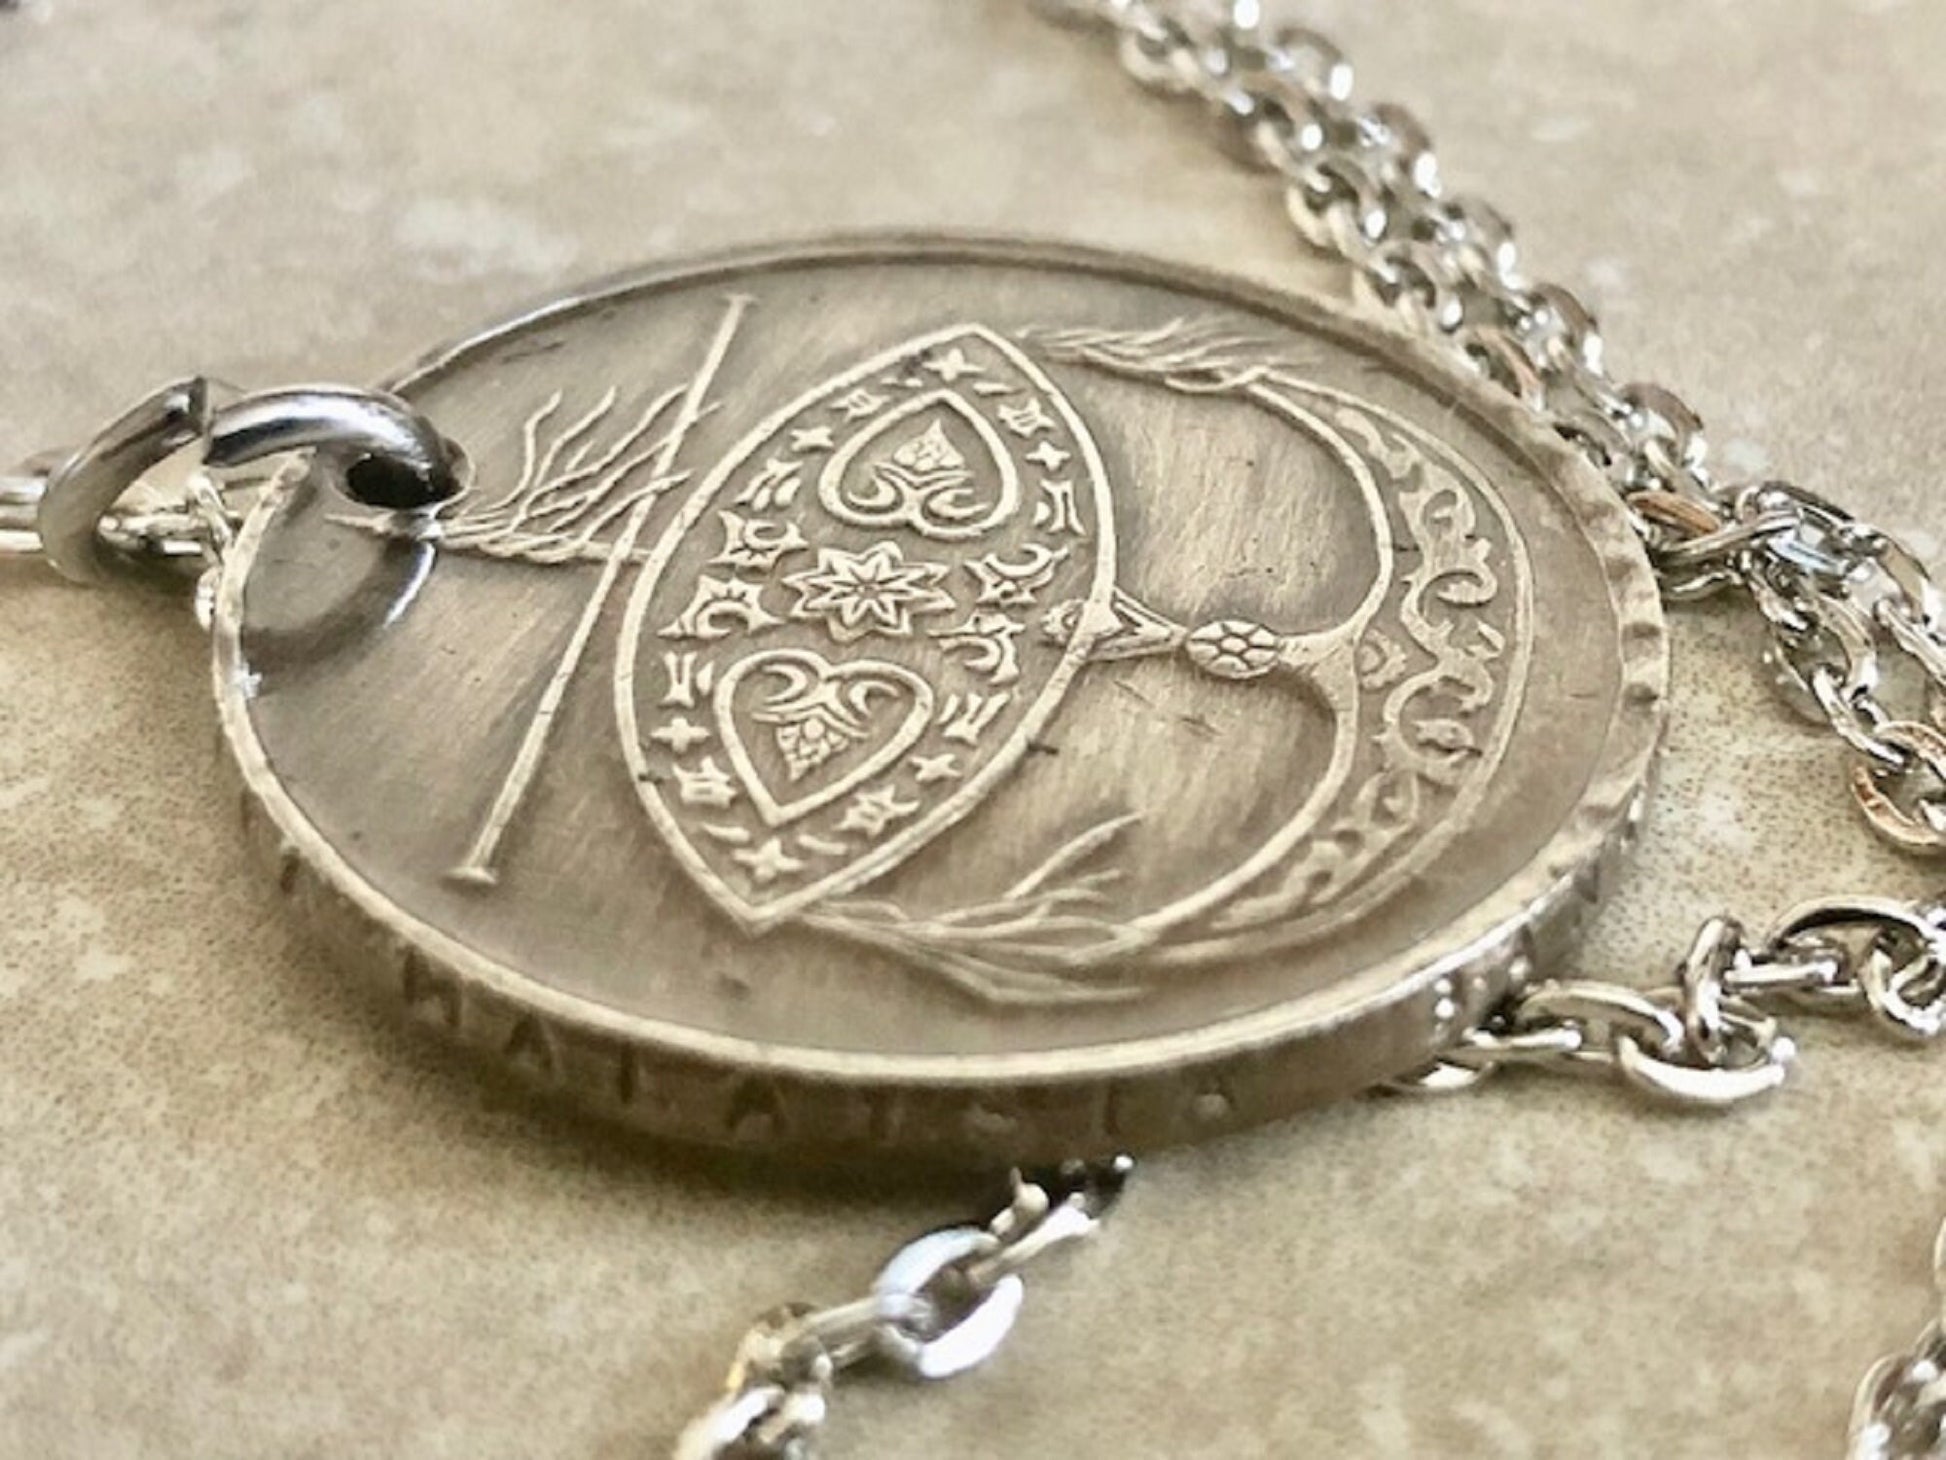 Malaysia Coin 50 Sen Pendant Necklace Custom Made Vintage Malaysian Jewelry Rare coins - Coin Enthusiast - Fashion Accessory